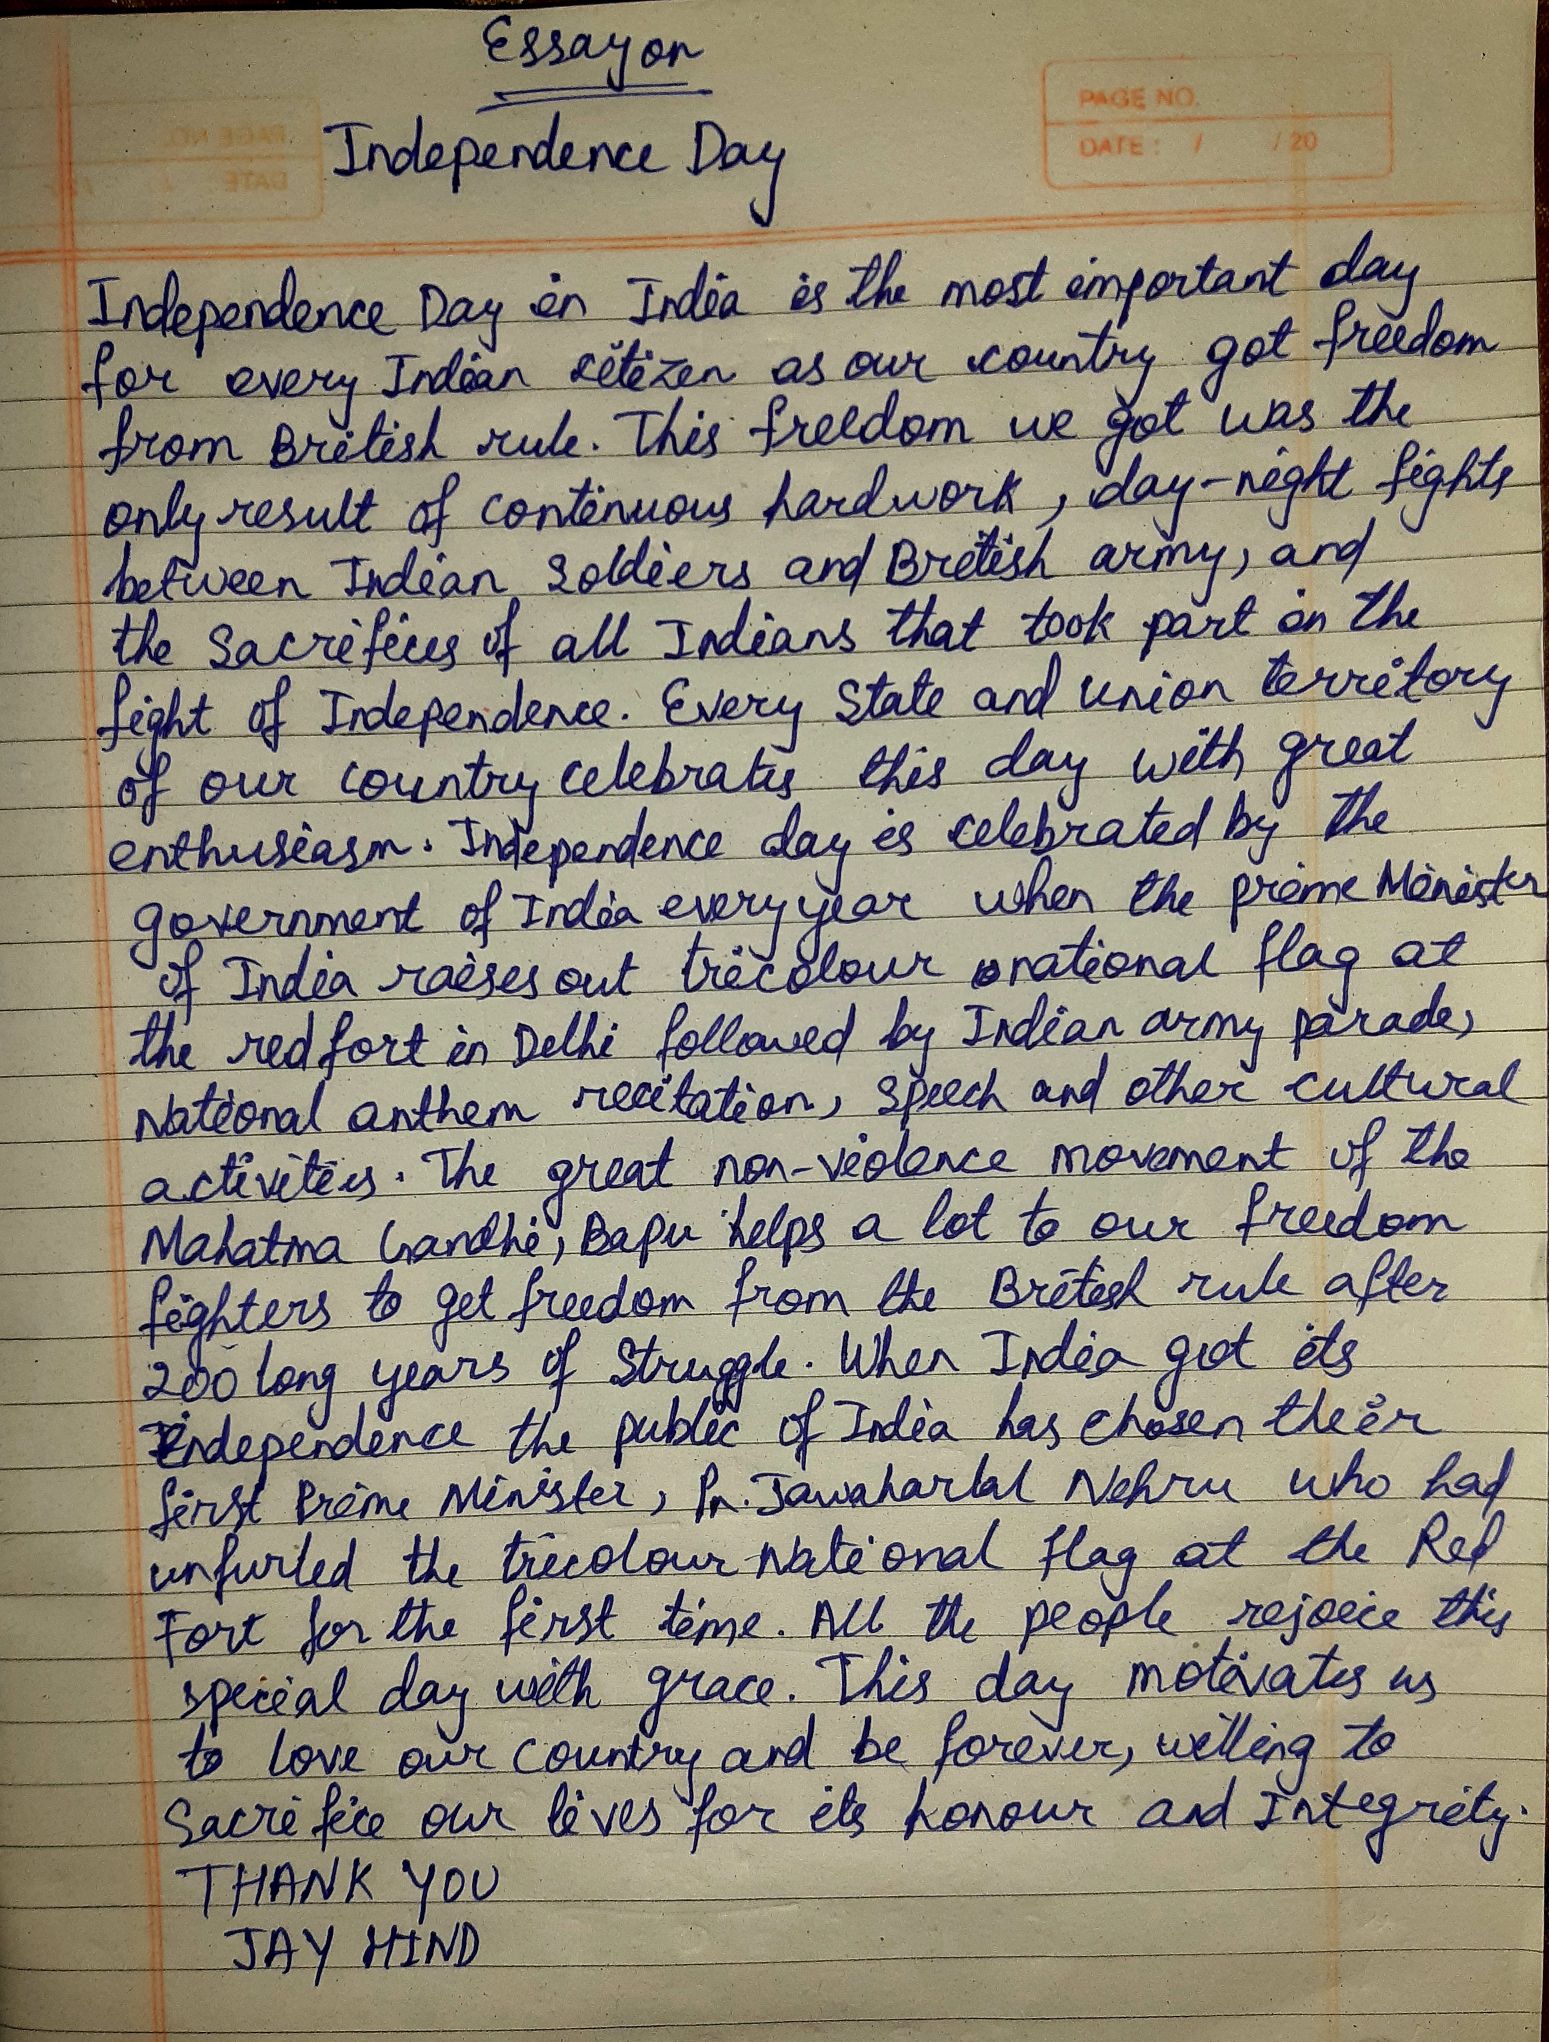 essay on india's independence